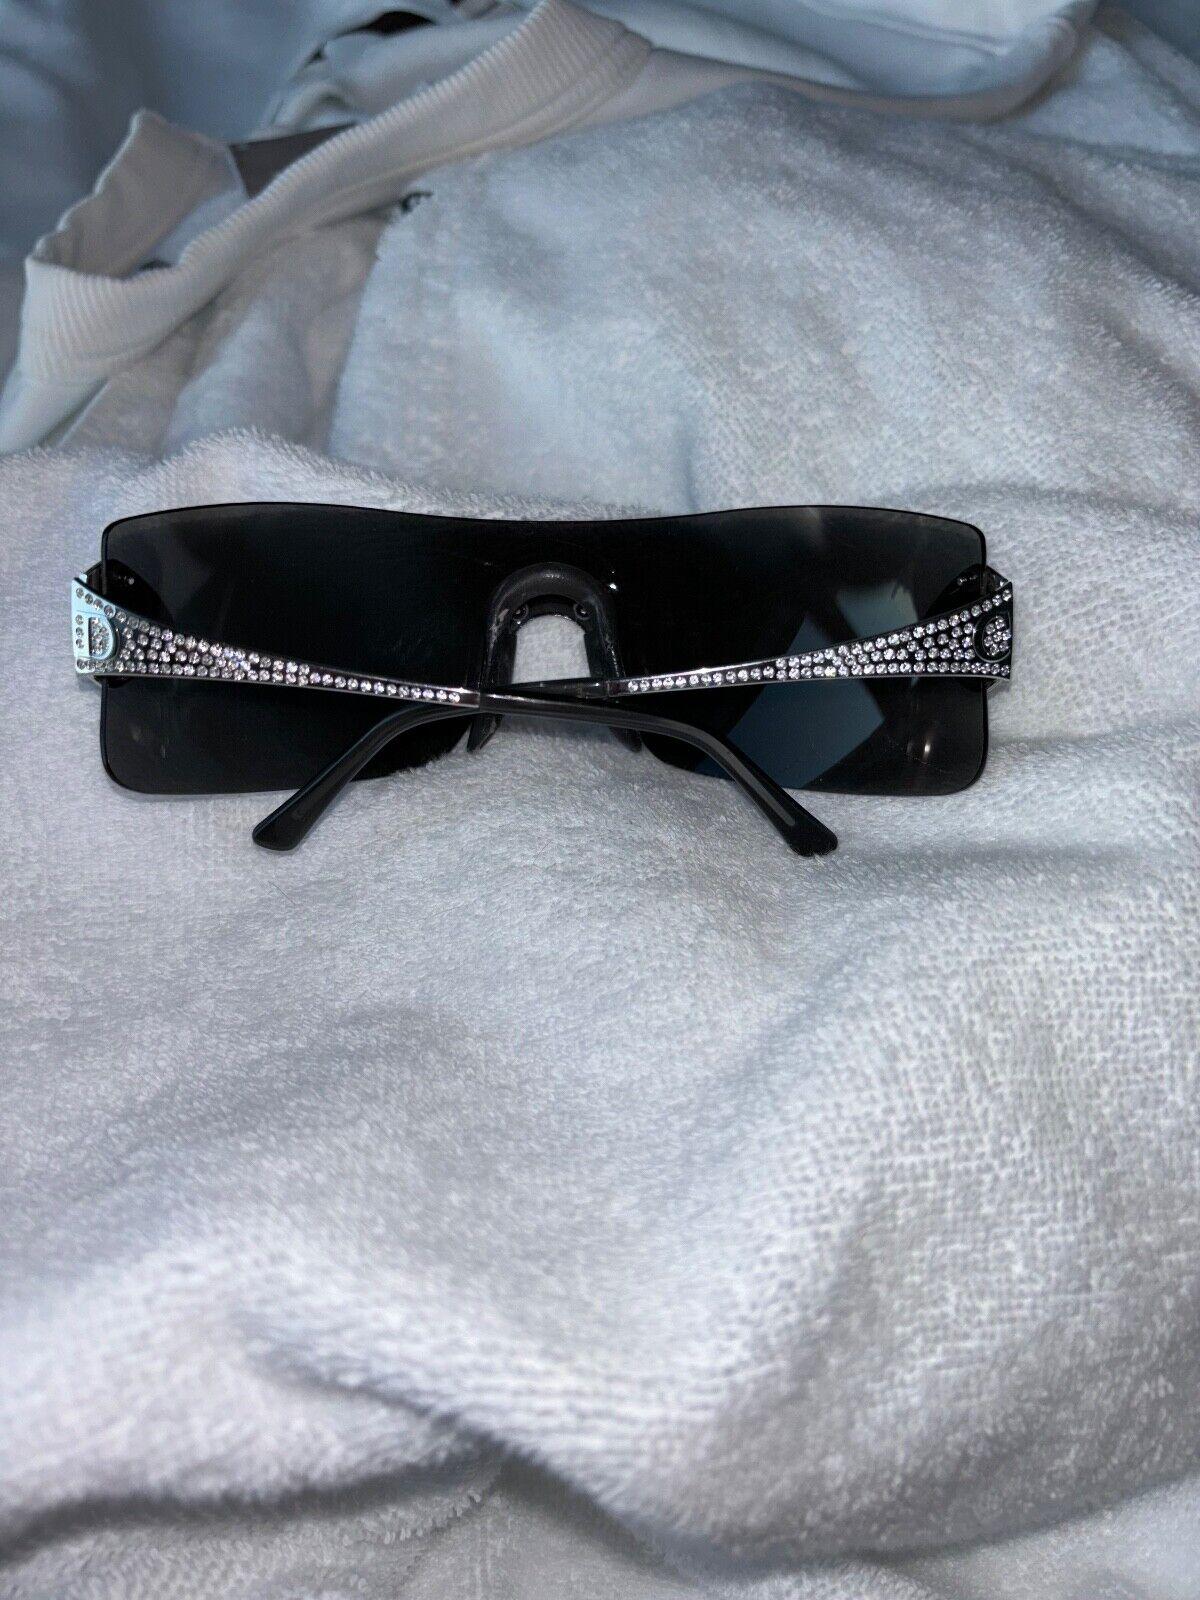 Dior by John Galliano 
Vintage
Runway
FW00
Gray lense
White Gold plated arms
Swarovski Crystals

Notes: scratches/cracked looking lens. I've worn these and from the outside you cannot see the flaws when on. Used, selling AS IS

FINAL SALE